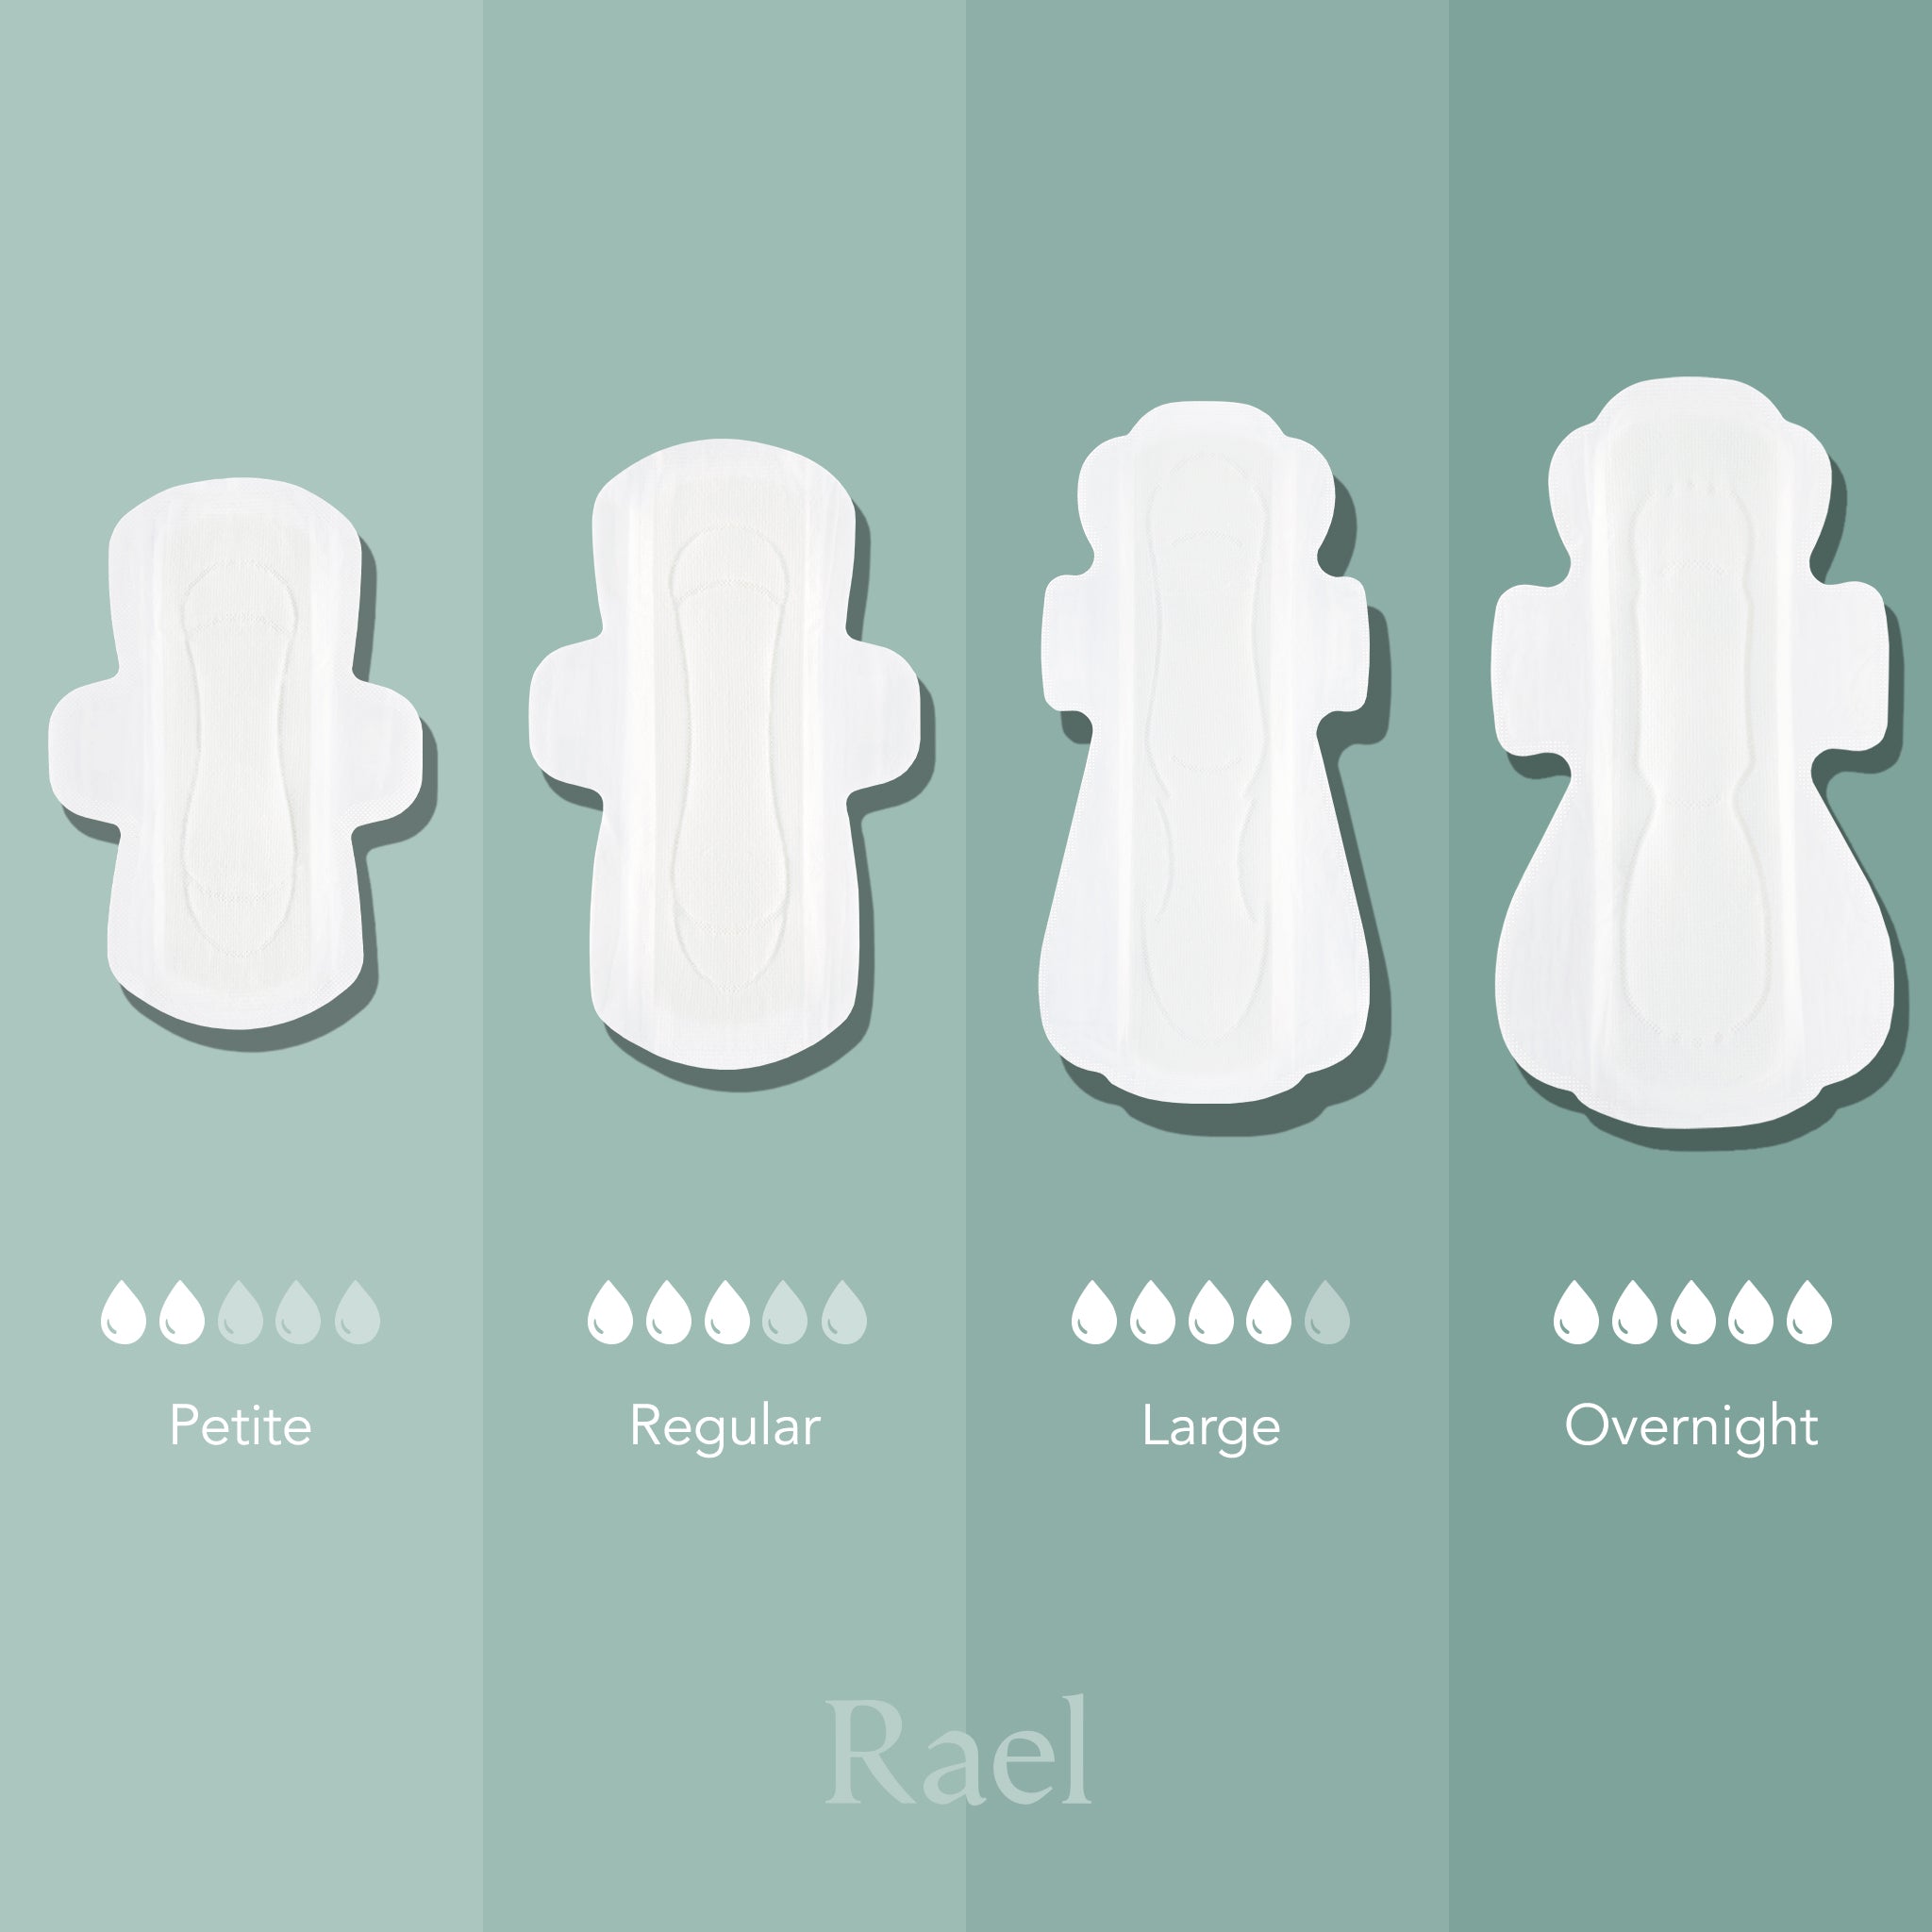 Rael Overnight Pads with Organic Cotton Cover 12s